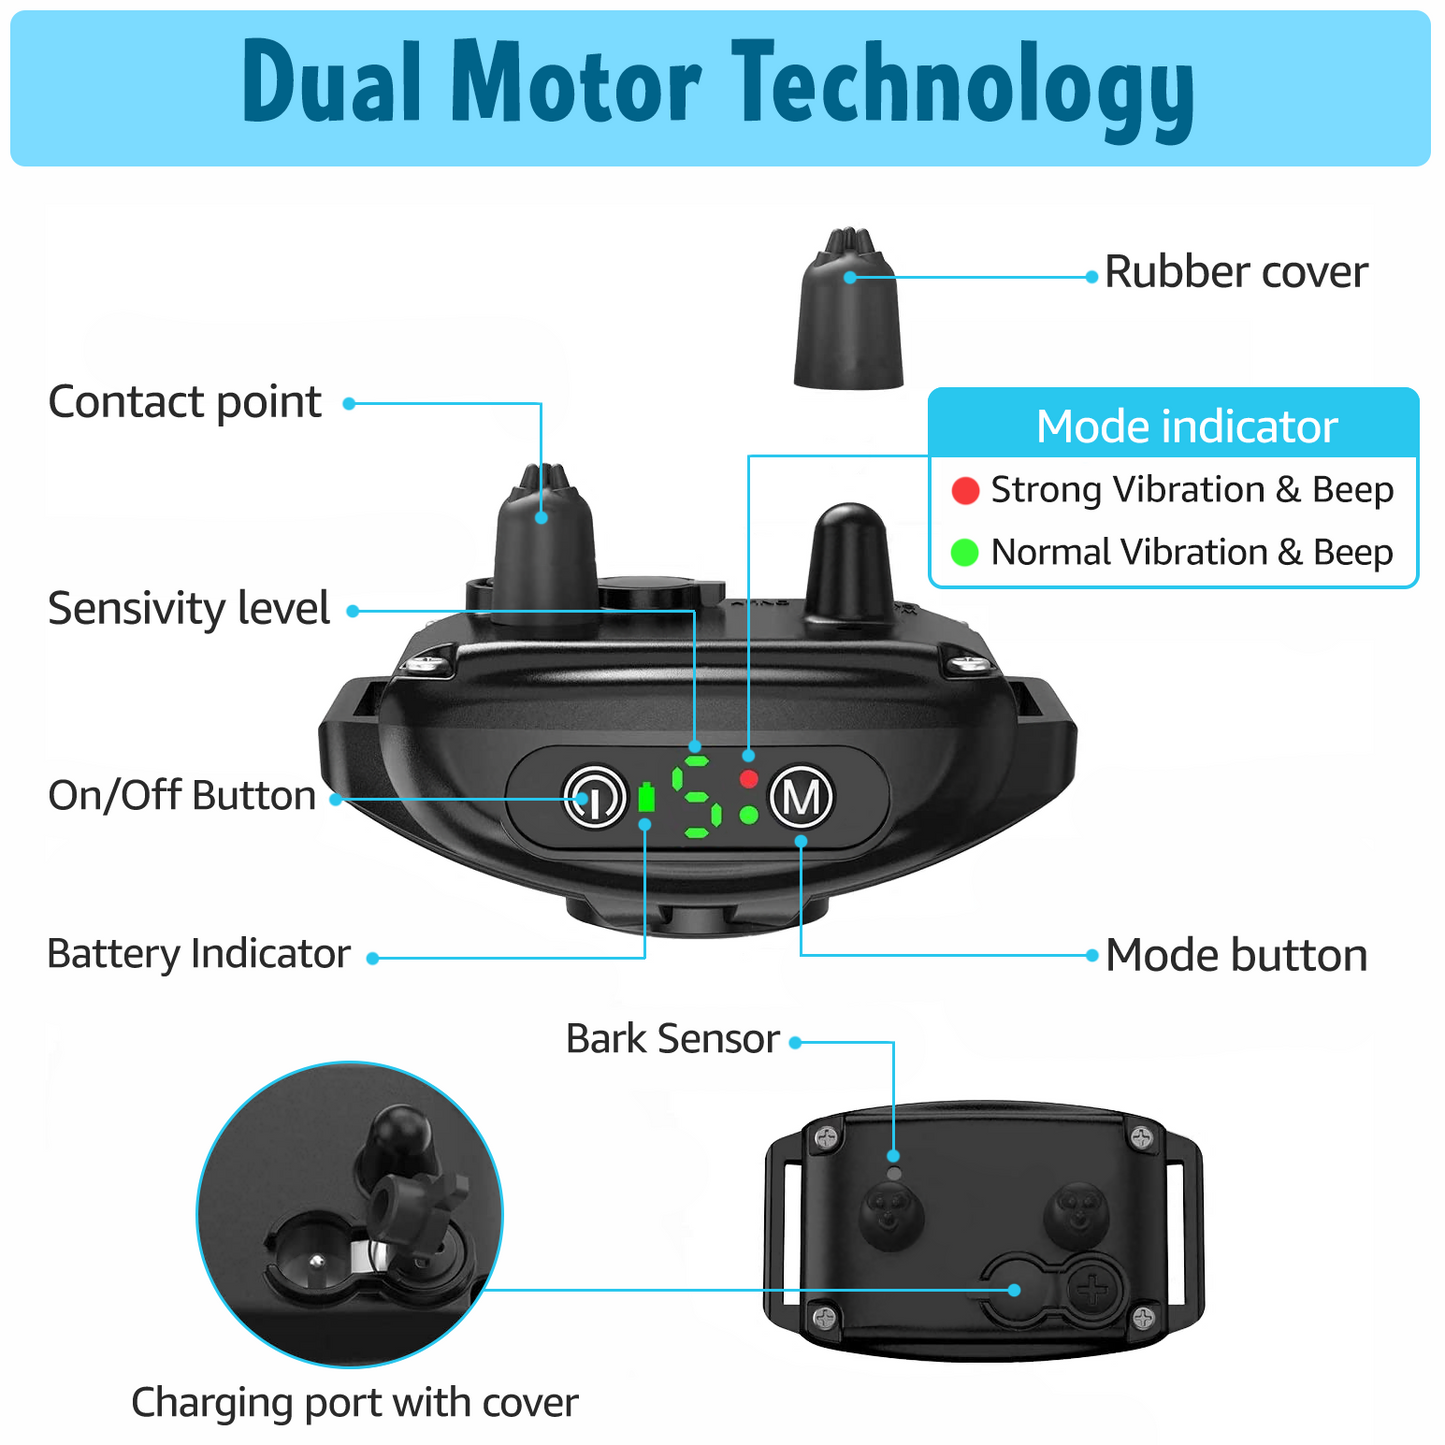 dual motor technology_contact point_sensivity level_on/off button_battery indicator_rubber cover_mode button_bark sensor_charging port with cover